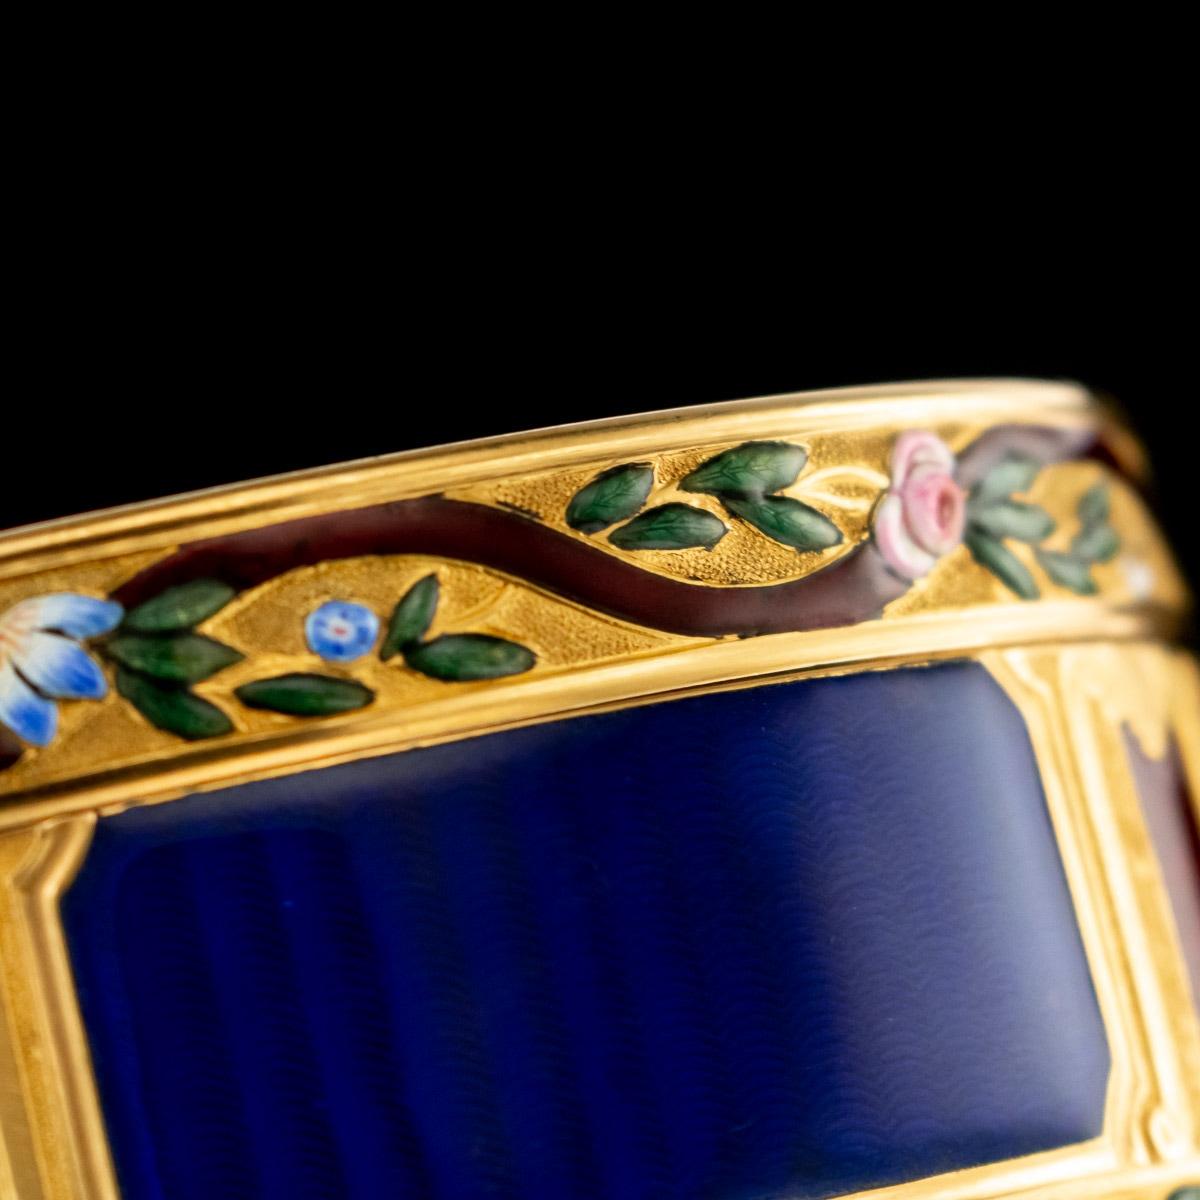 Antique French 18-Karat Gold and Hand Painted Enamel Snuff Box, circa 1770 5